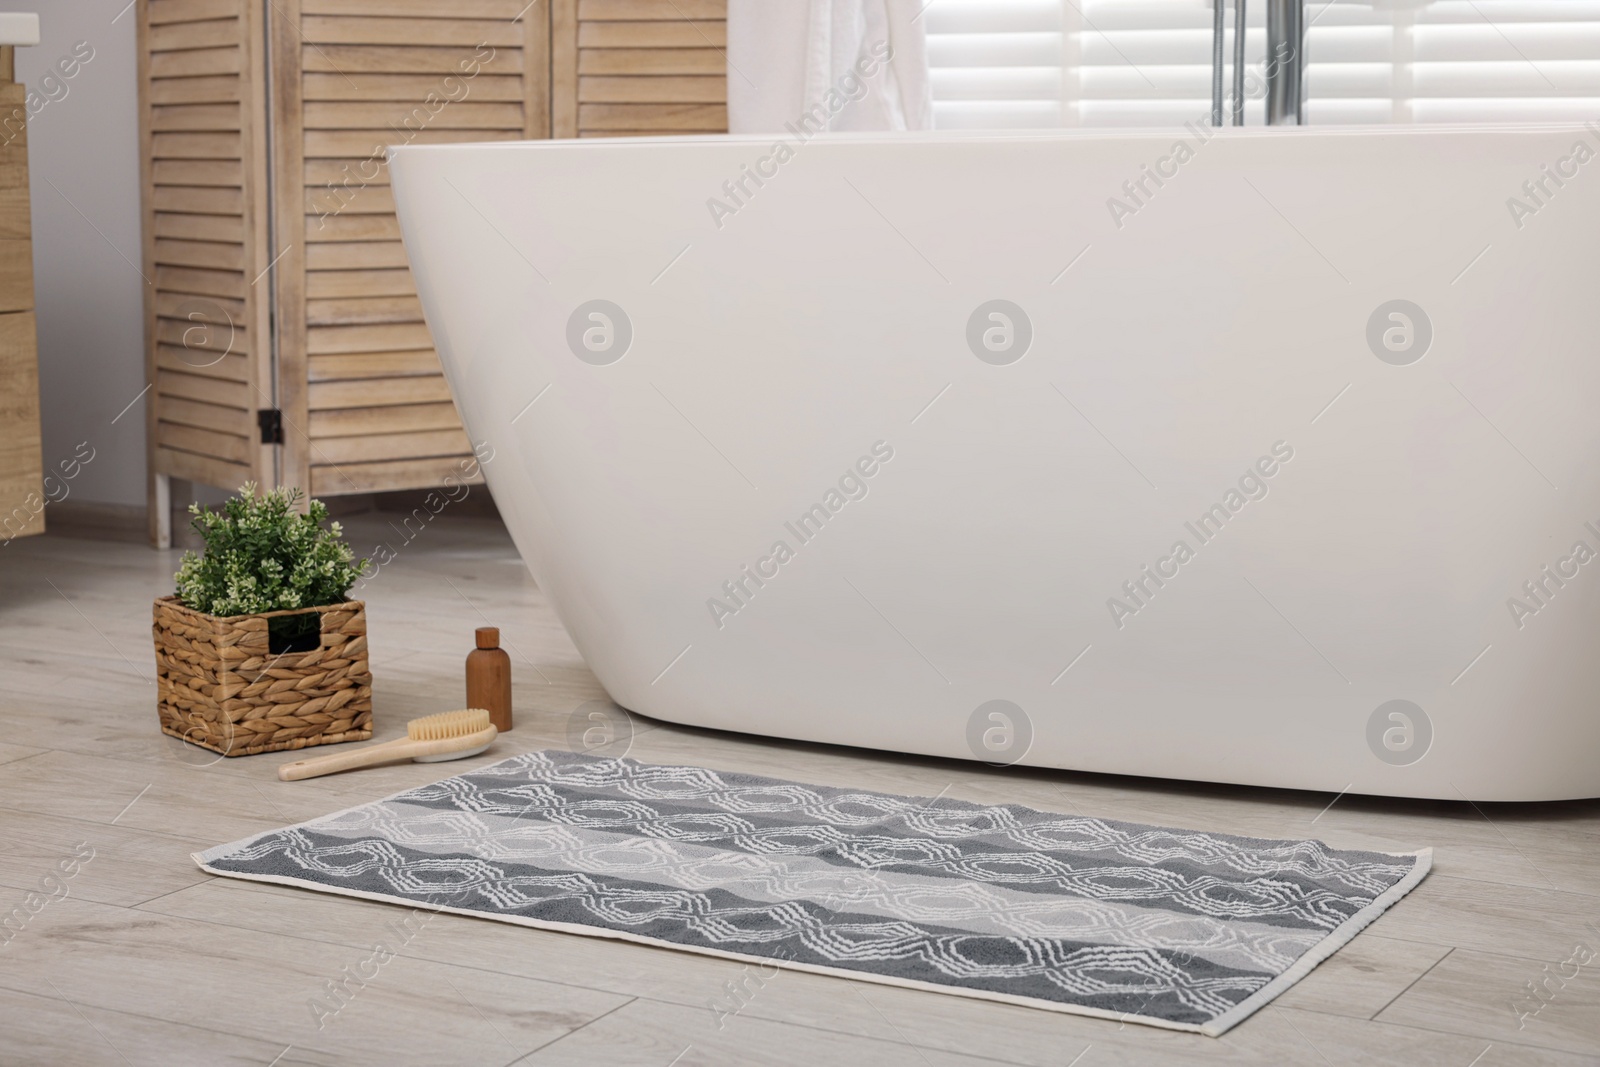 Photo of Soft bath mat with pattern on floor in bathroom